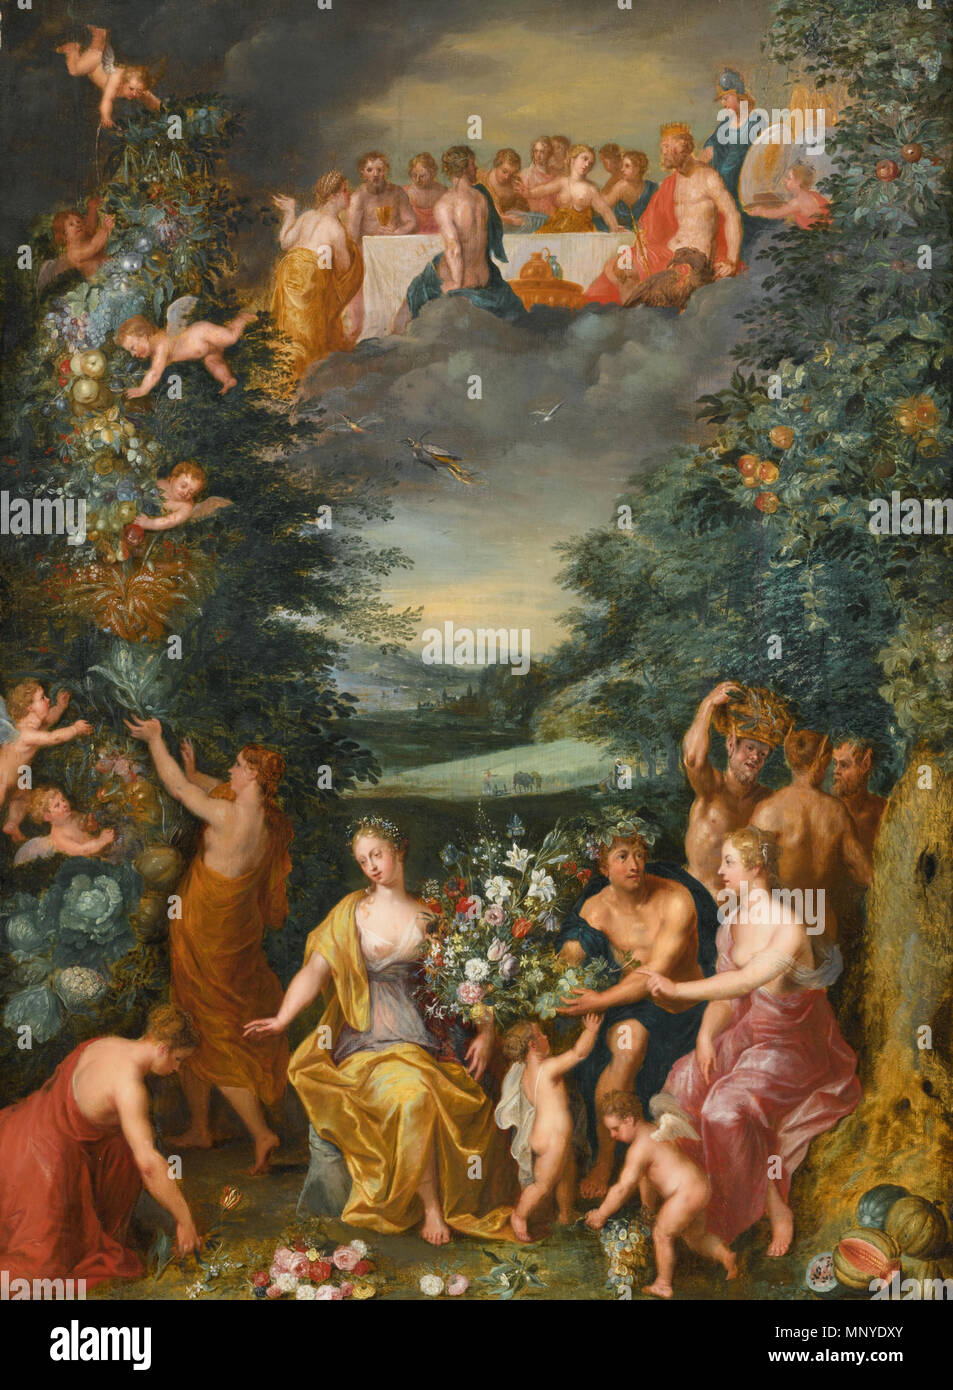 Homage to the Goddess Flora with a Feast of the Gods    .    Workshop of Jan Brueghel the Younger  (1601–1678)    Alternative names Jan Bruegel (II), Jan Brueghel (II), Jan Brueghel the Younger  Description Flemish painter and draughtsman  Date of birth/death 13 September 1601 (baptised) 1 September 1678  Location of birth/death Antwerp Antwerp  Work location Italy (1622-August 1625), Antwerp (1625-1678)  Authority control  : Q285933 VIAF: 42046414 ISNI: 0000 0000 8376 3302 ULAN: 500013747 LCCN: n85095027 WGA: BRUEGHEL, Jan the Younger WorldCat    and   Workshop of Hendrick van Balen  (1575–16 Stock Photo